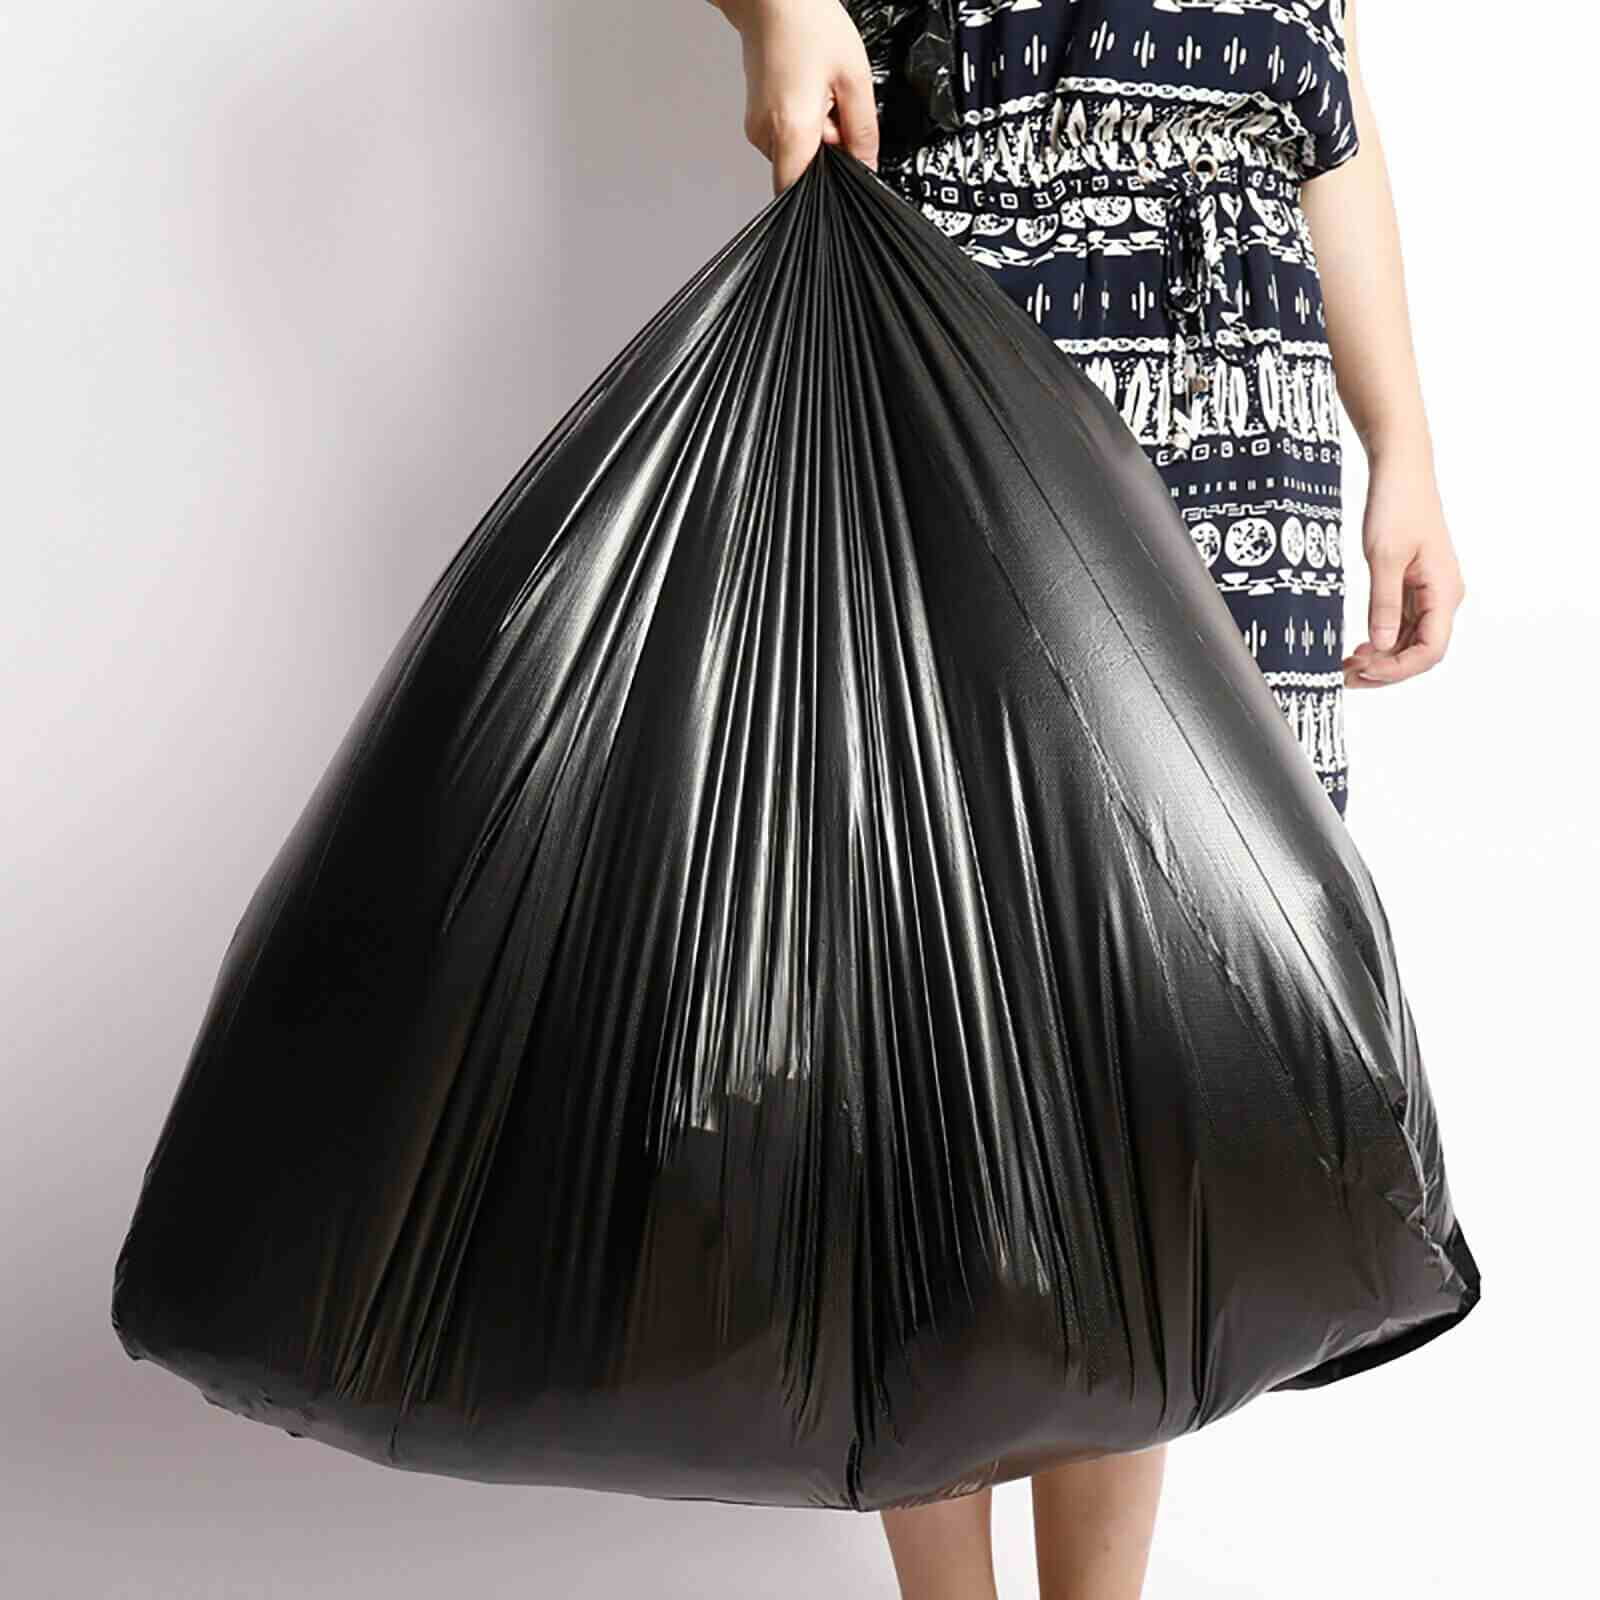 65 Gallon Trash Bags │ 2.7 Mil │ Black Heavy Duty Garbage Can Liners │ 50”  X 48”